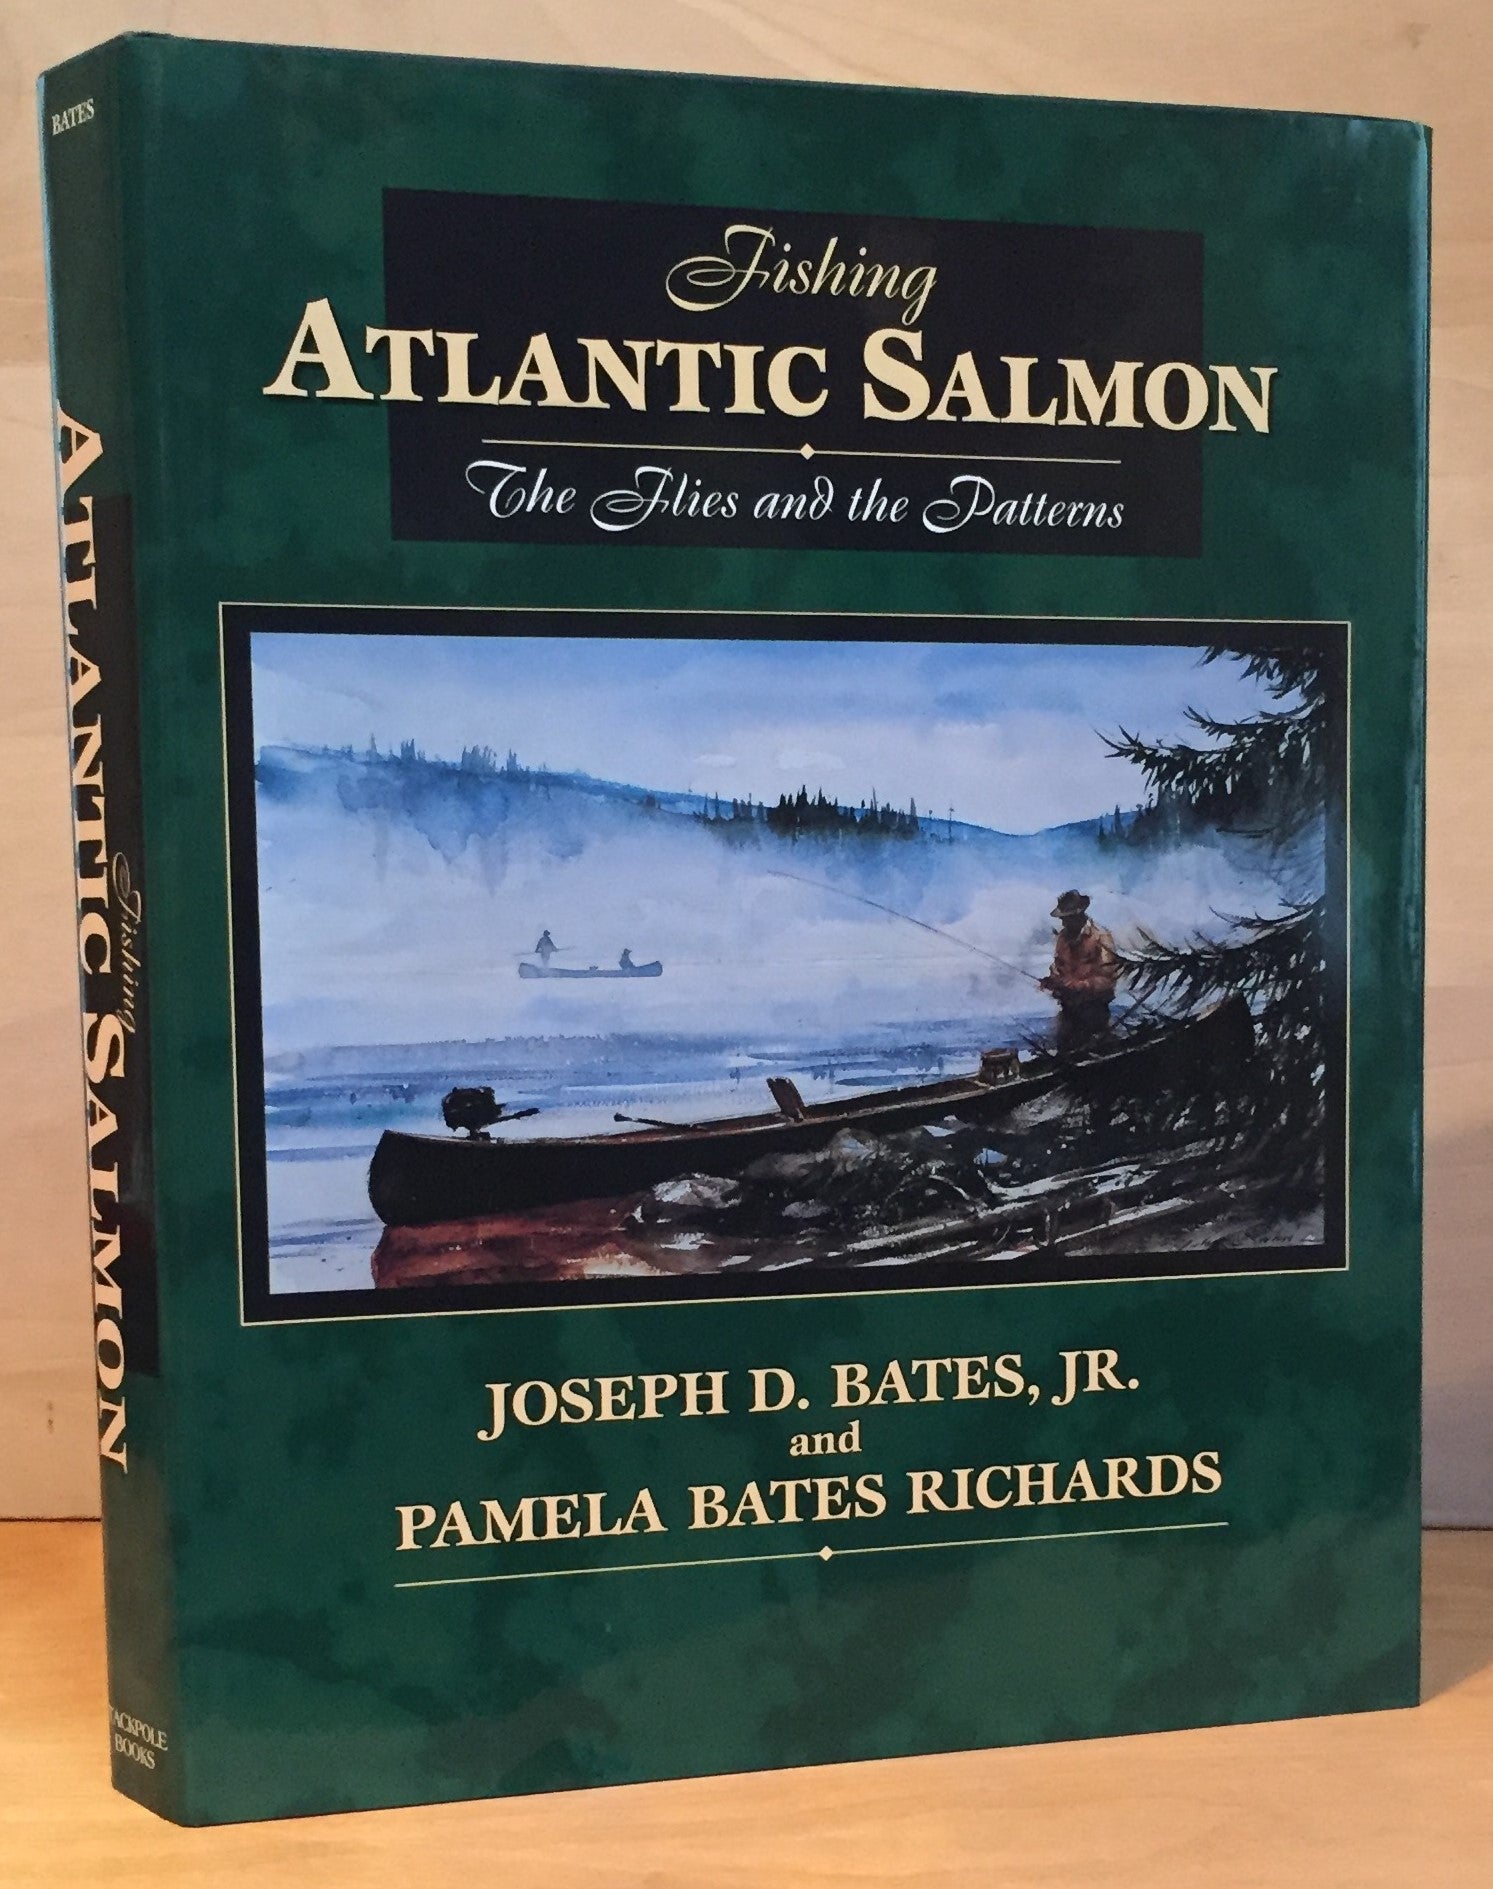 Fishing Atlantic Salmon: The Flies and the Patterns Signed